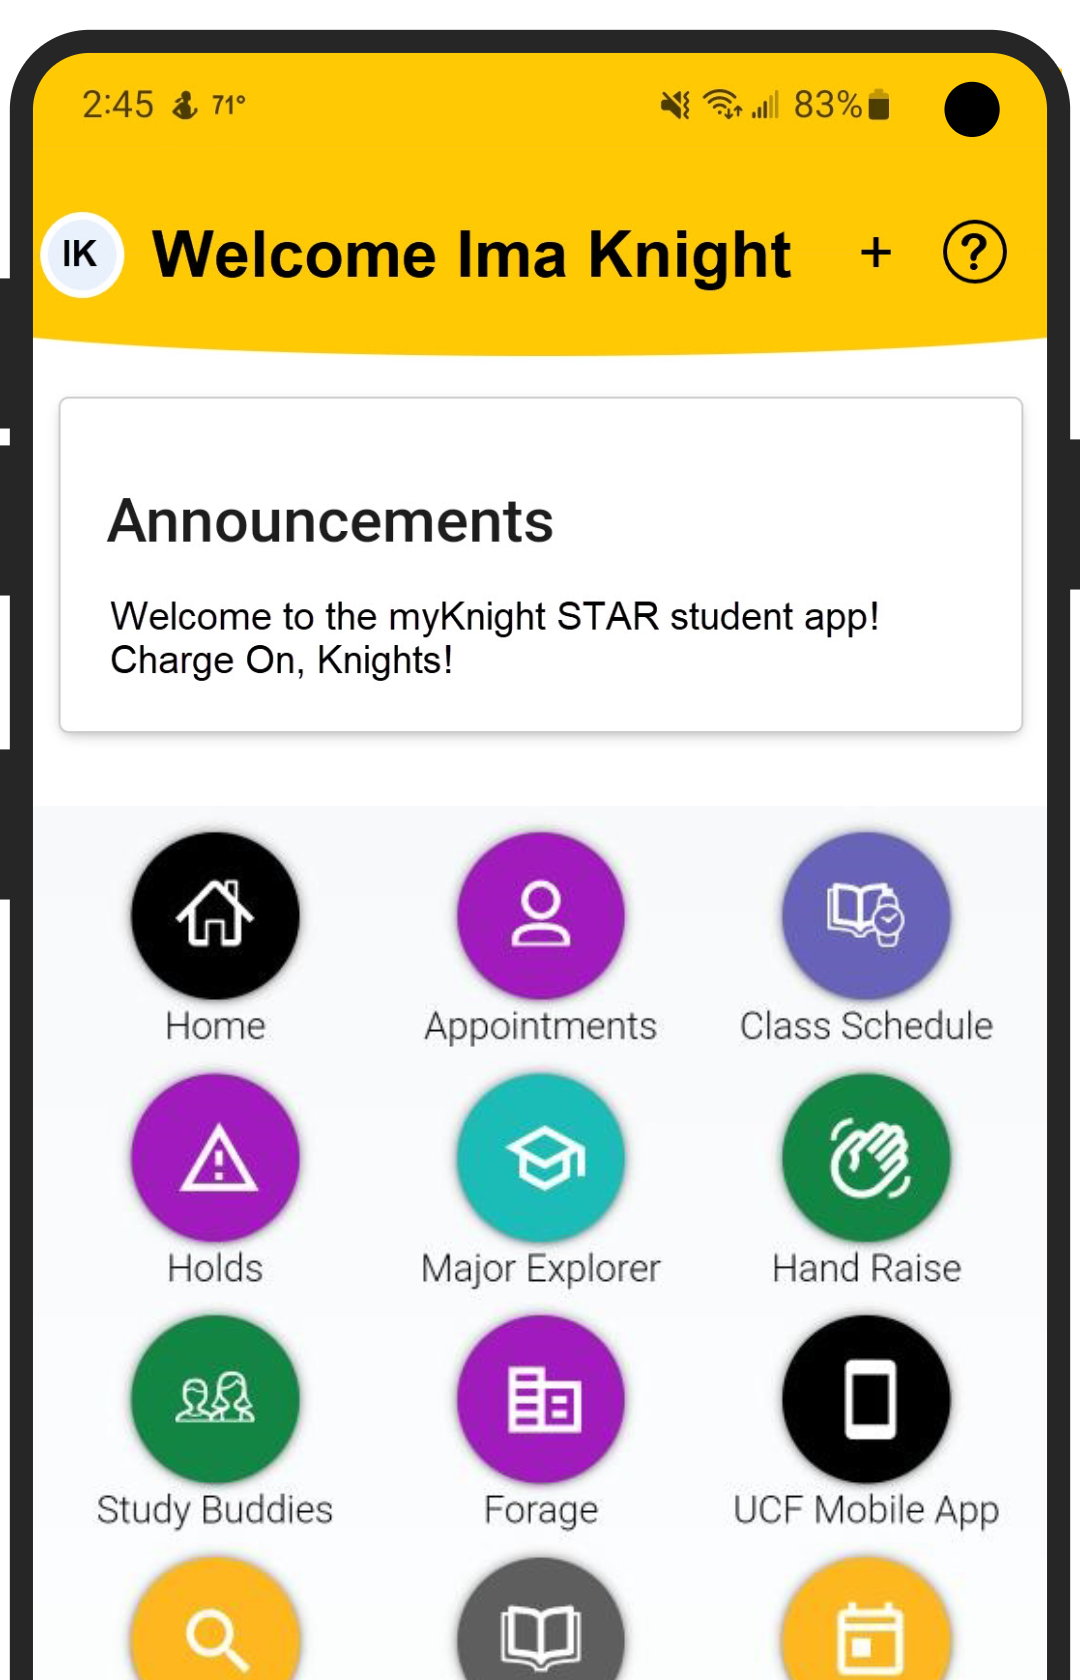 Preview of the myKnight STAR app home page